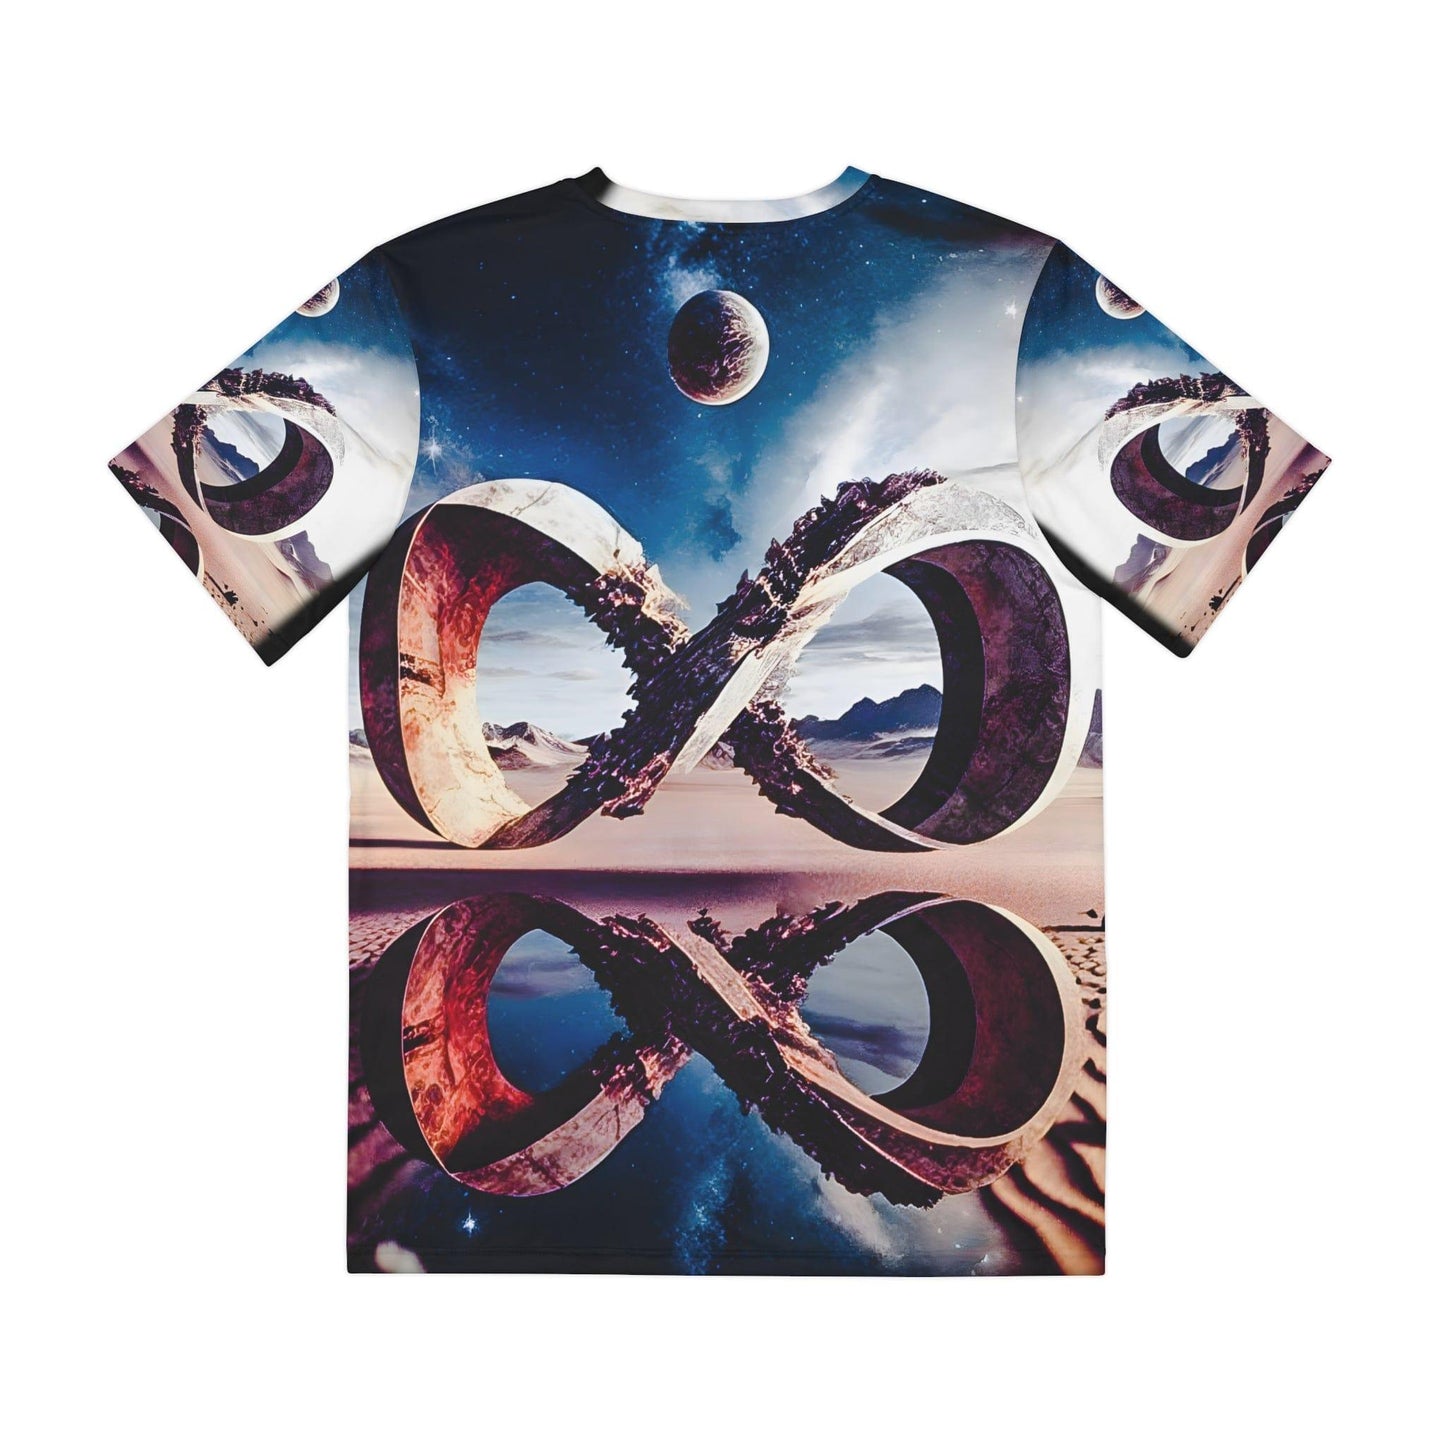 Surreal Infinite Possibilities - All Over Print (AOP) / Sublimation Design - Digital AI Art T-Shirt for Street or Festival Wear - Alchemystics.org